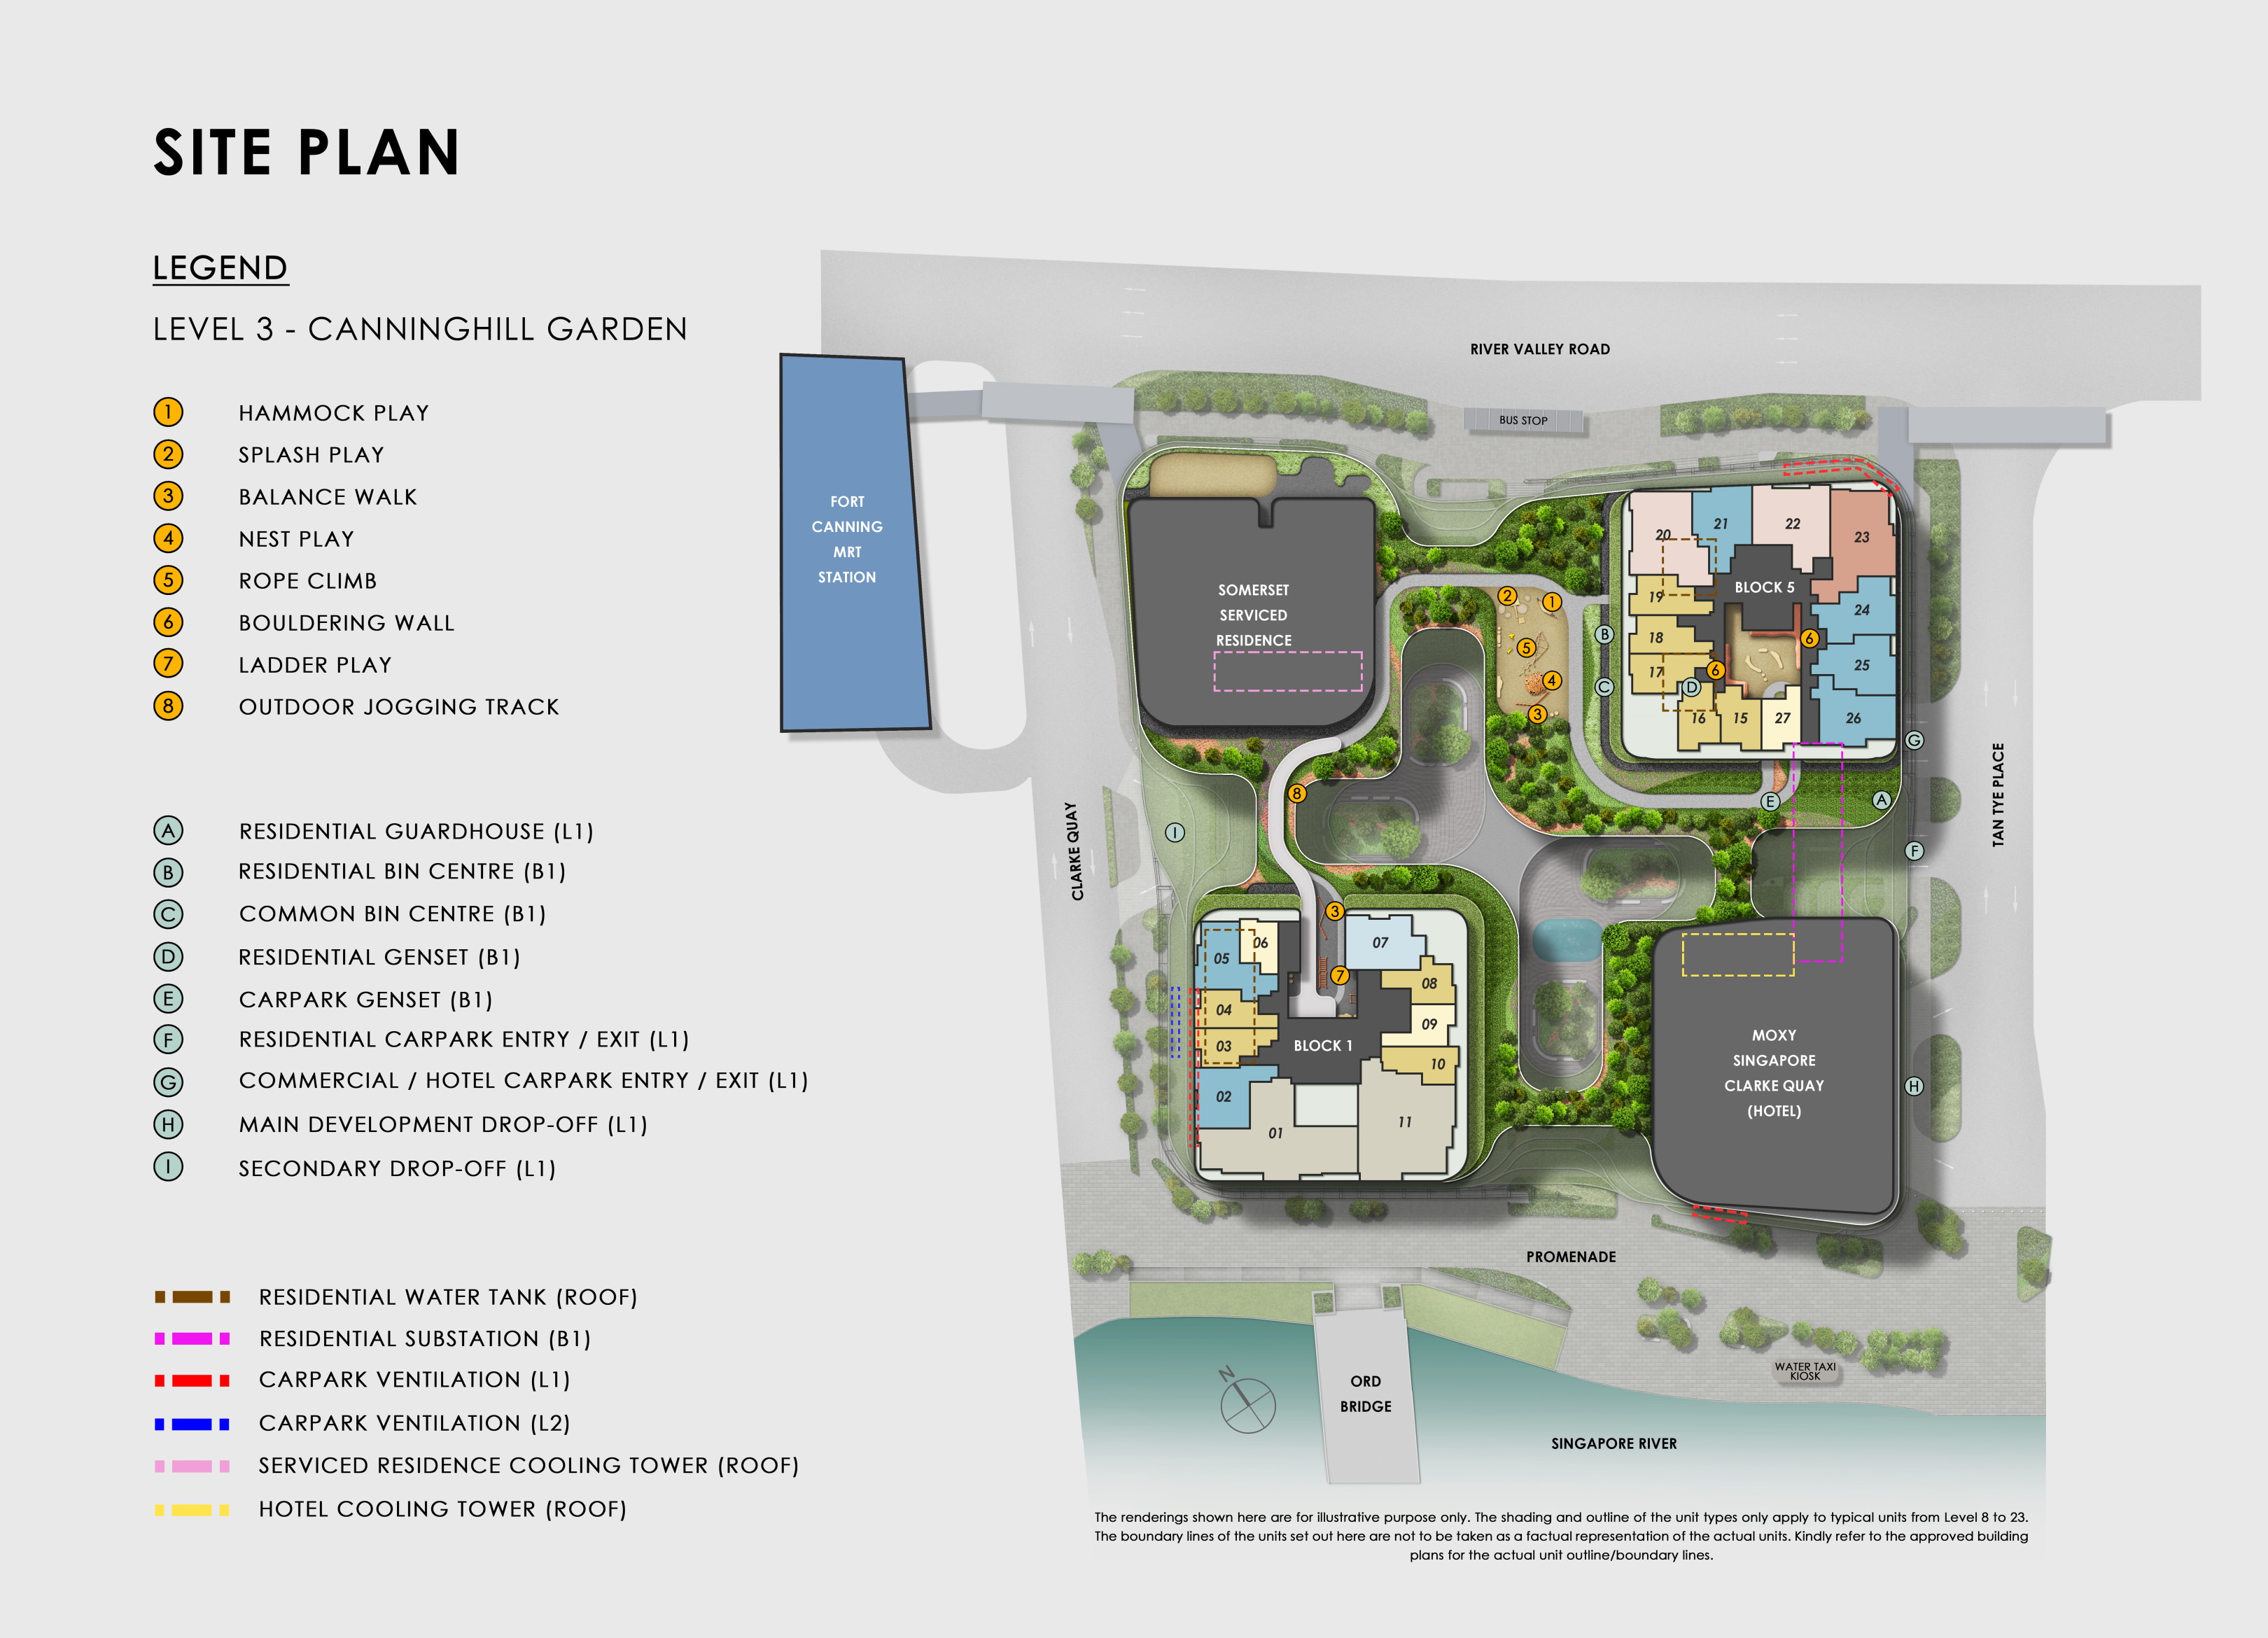 Site Plan 1 (CanningHill Piers)